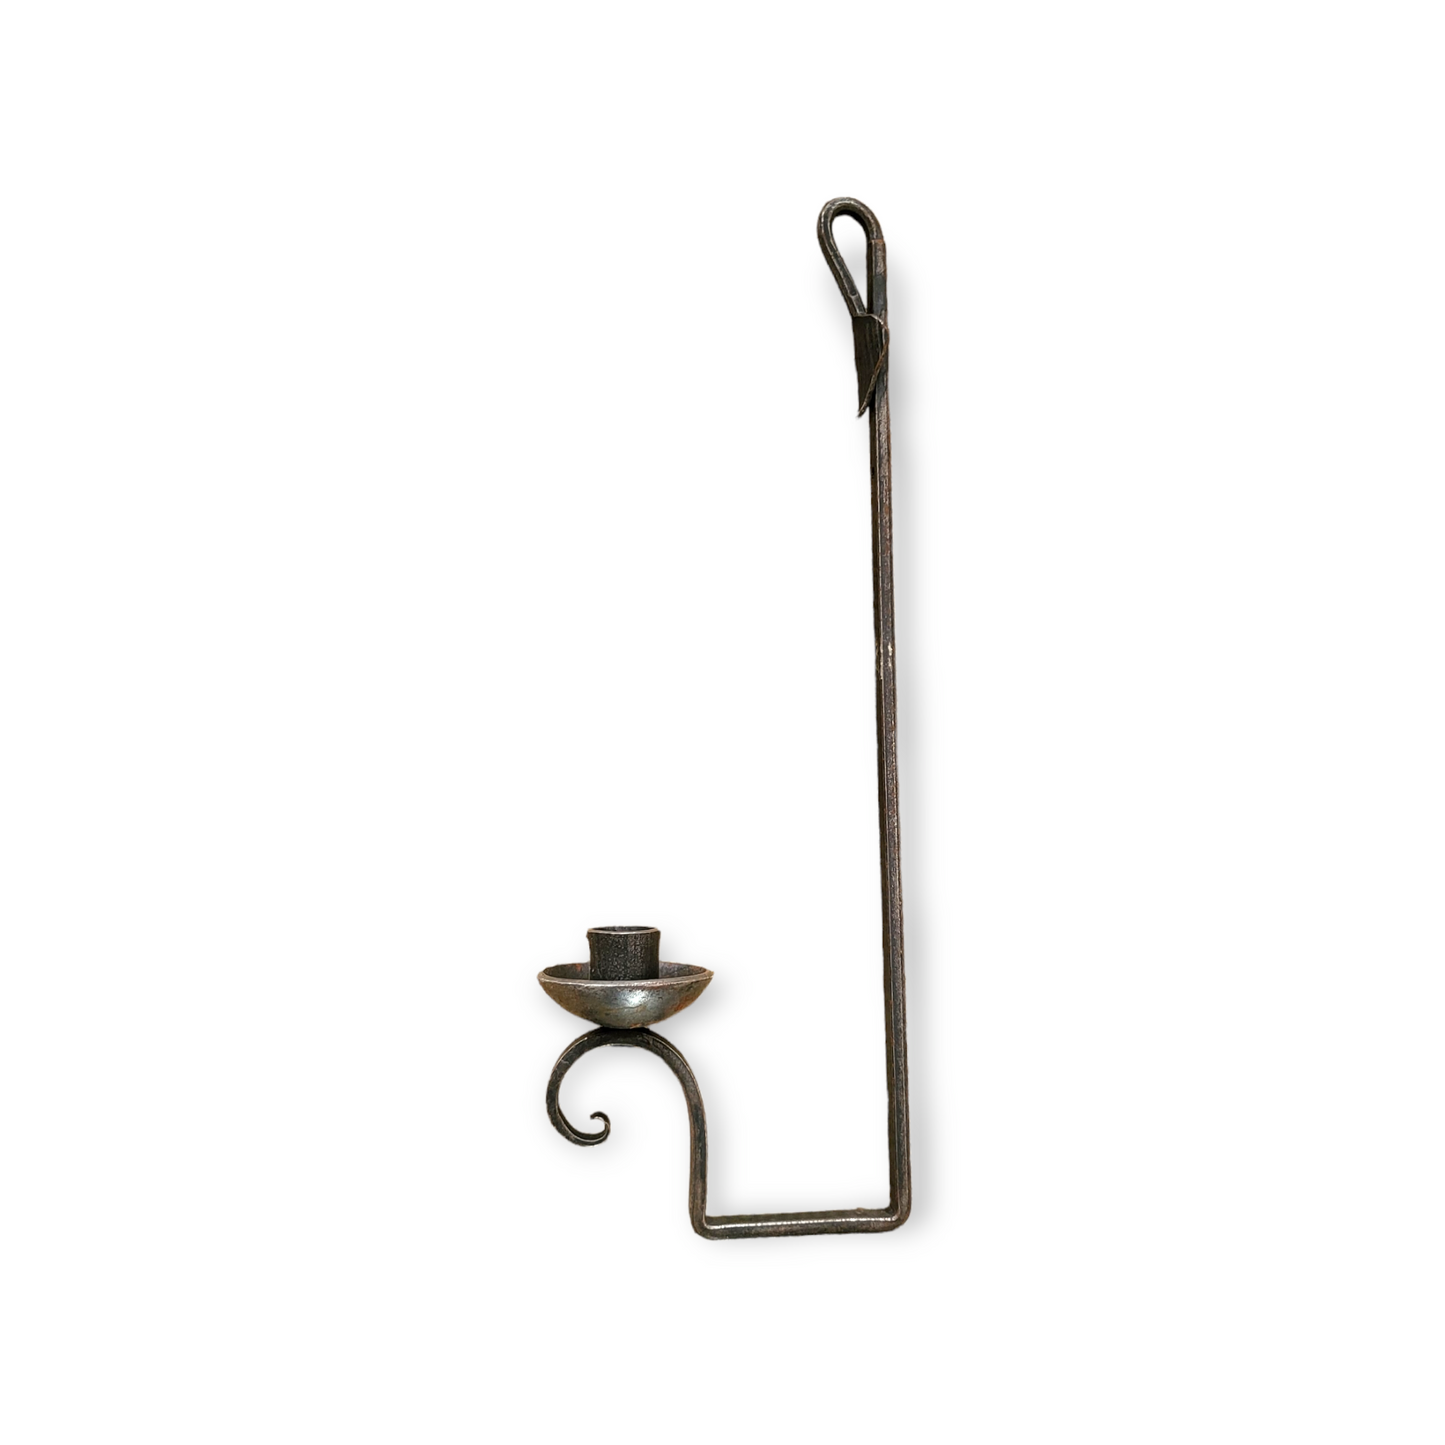 Vintage Wrought Iron Wall Sconce Candle Holder w/Leaf Motif